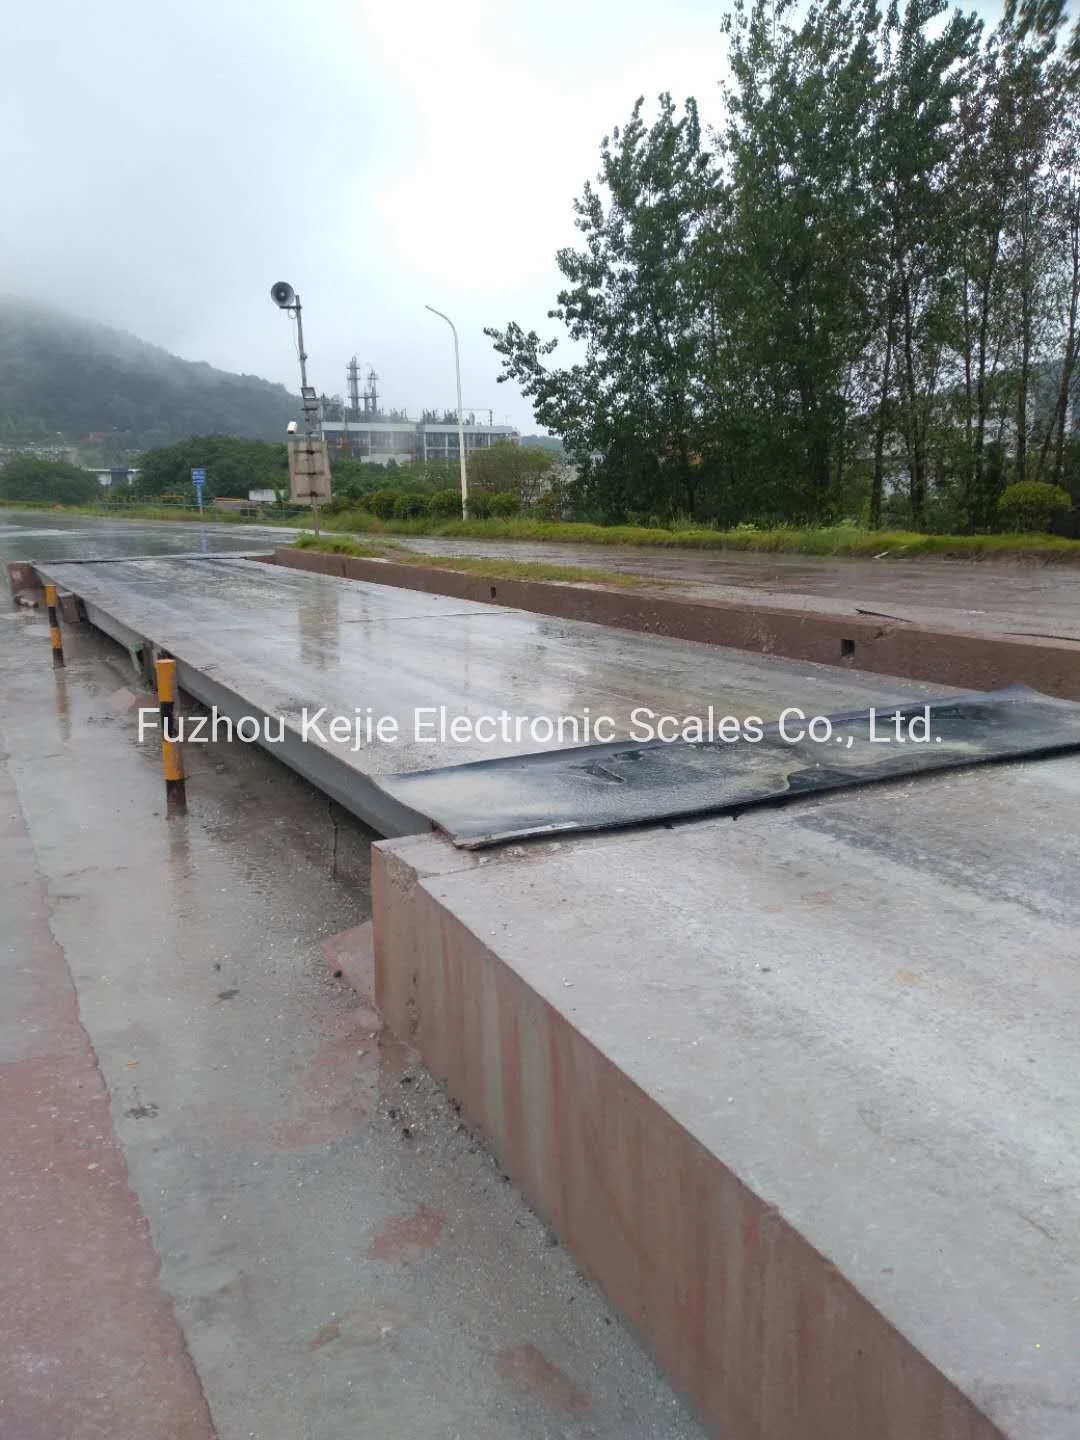 24X3m 100t Electronic Weighbridge /Truck Scale with Weighing Controller From China Kejie Factory for Industrial Truck Application